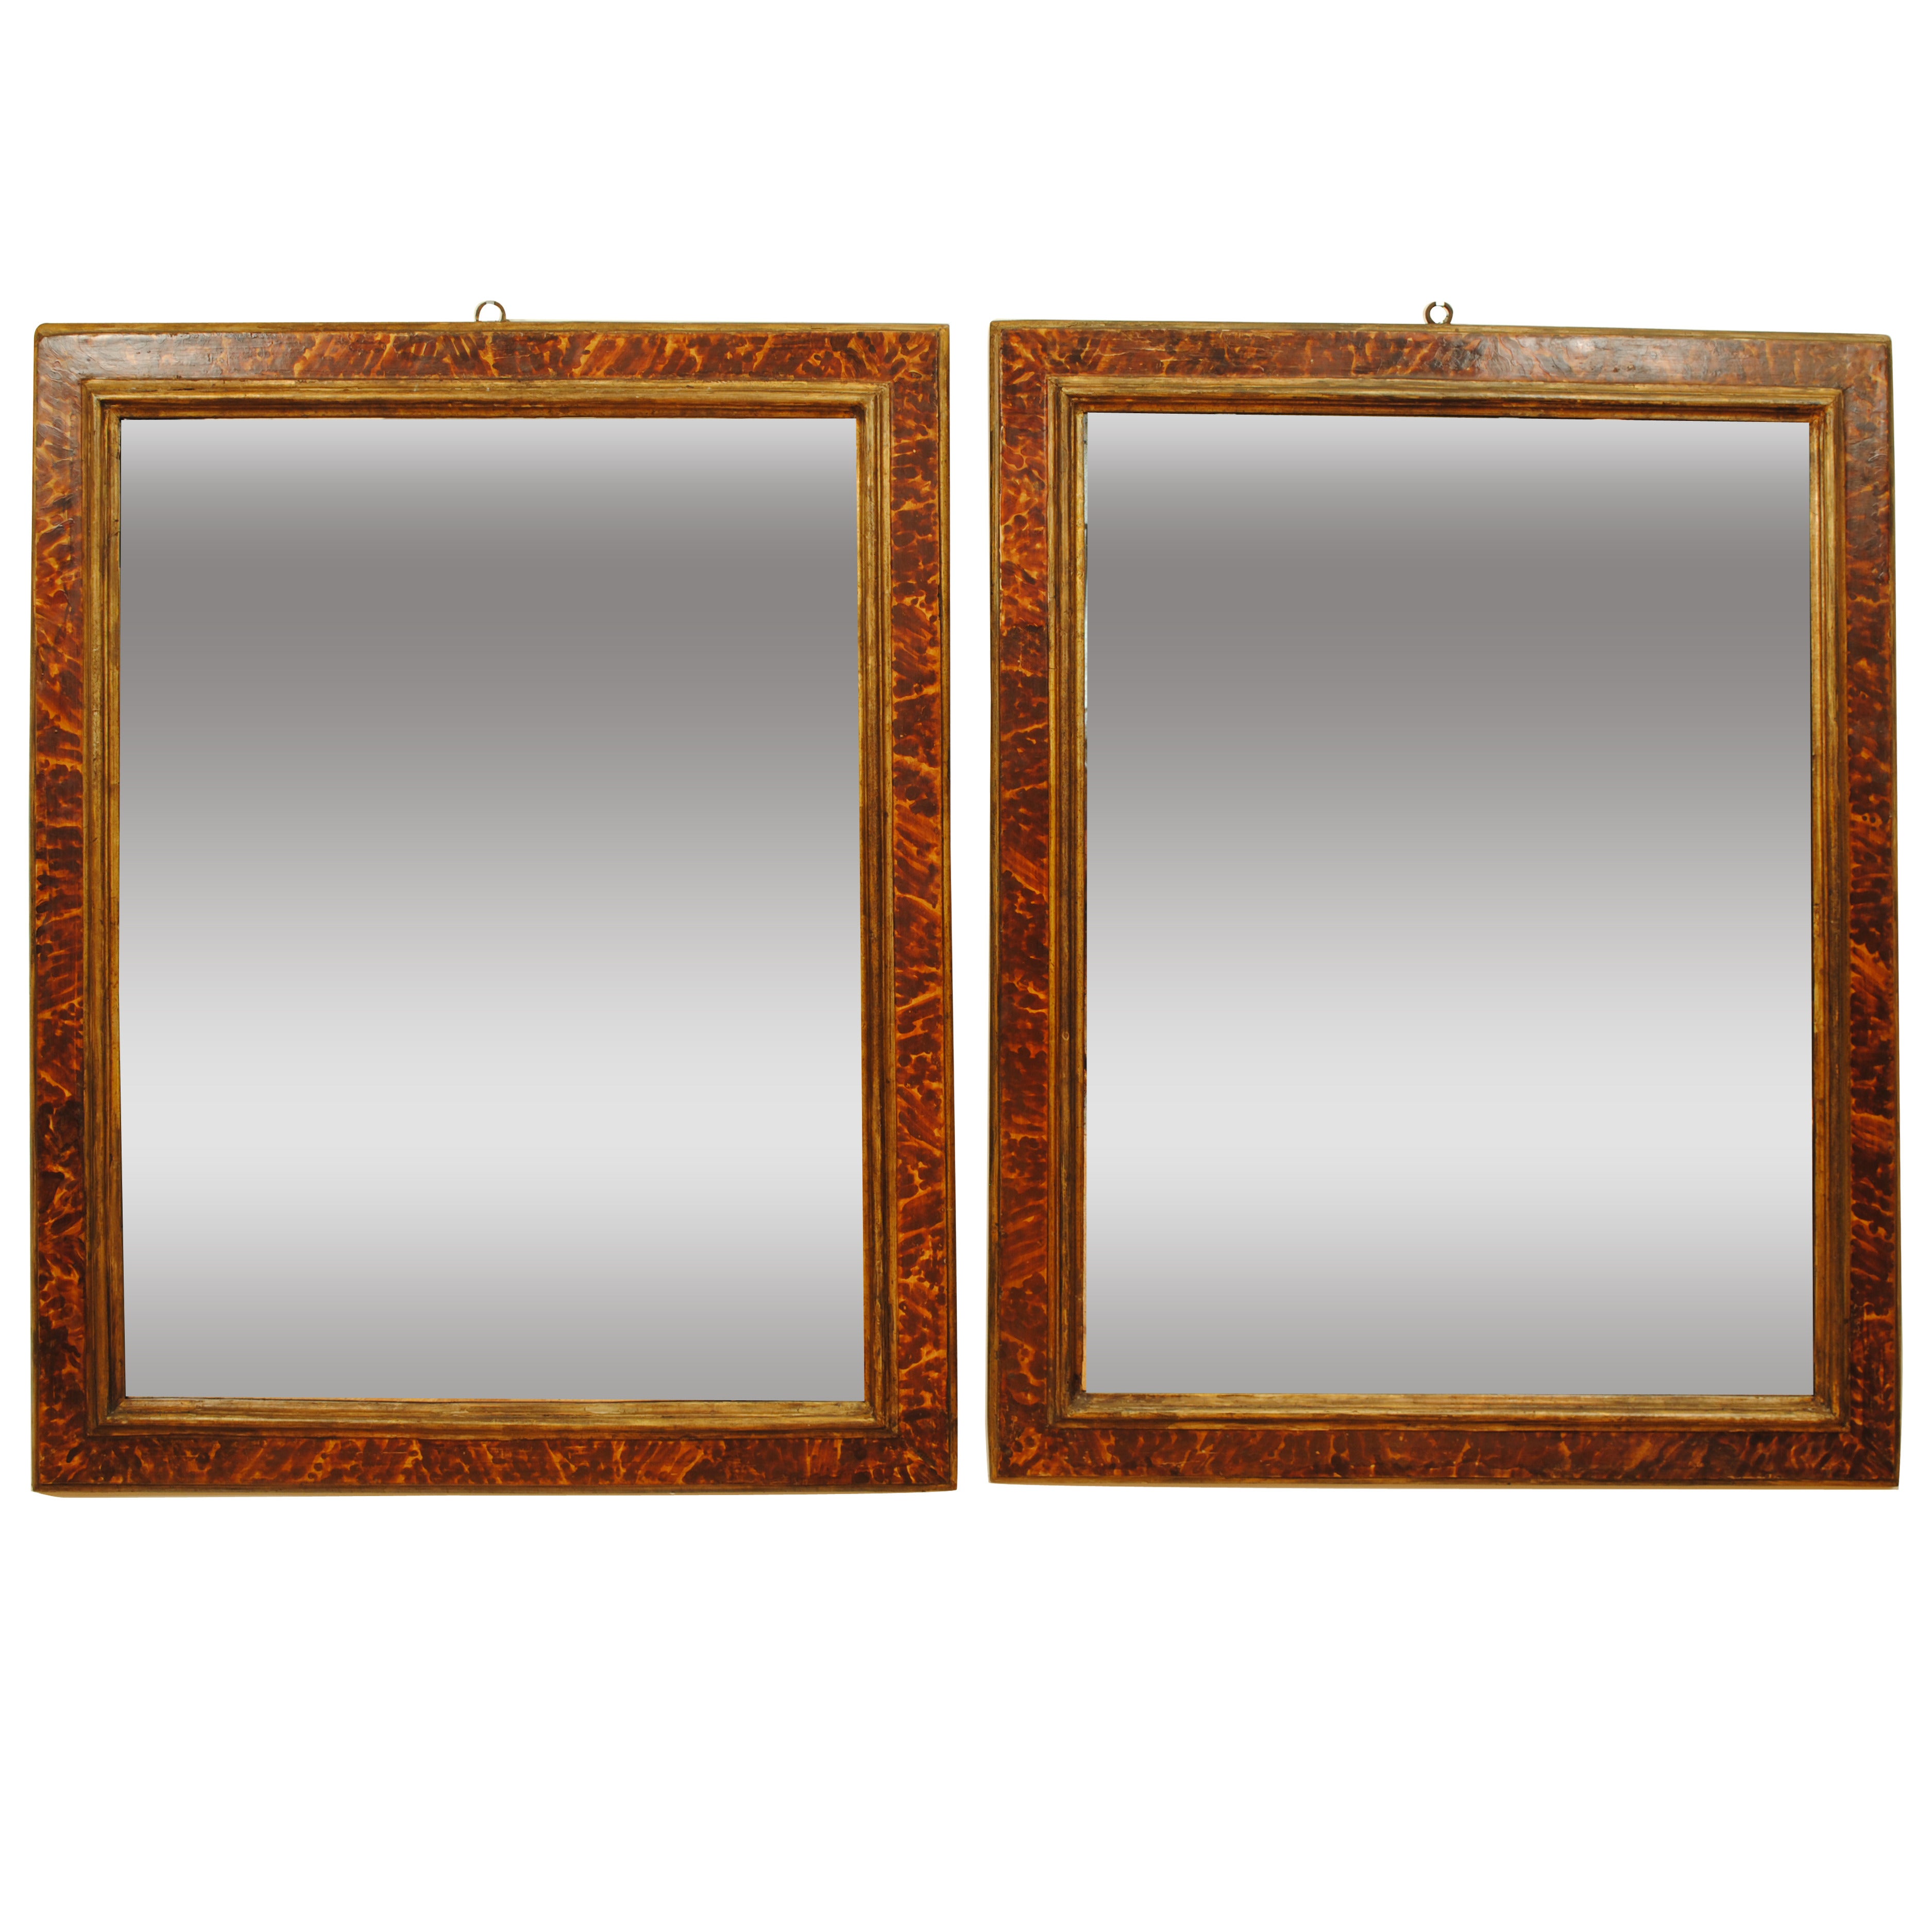 Pair of Italian Late Baroque Period Faux Tortoise Painted Frames or Mirrors